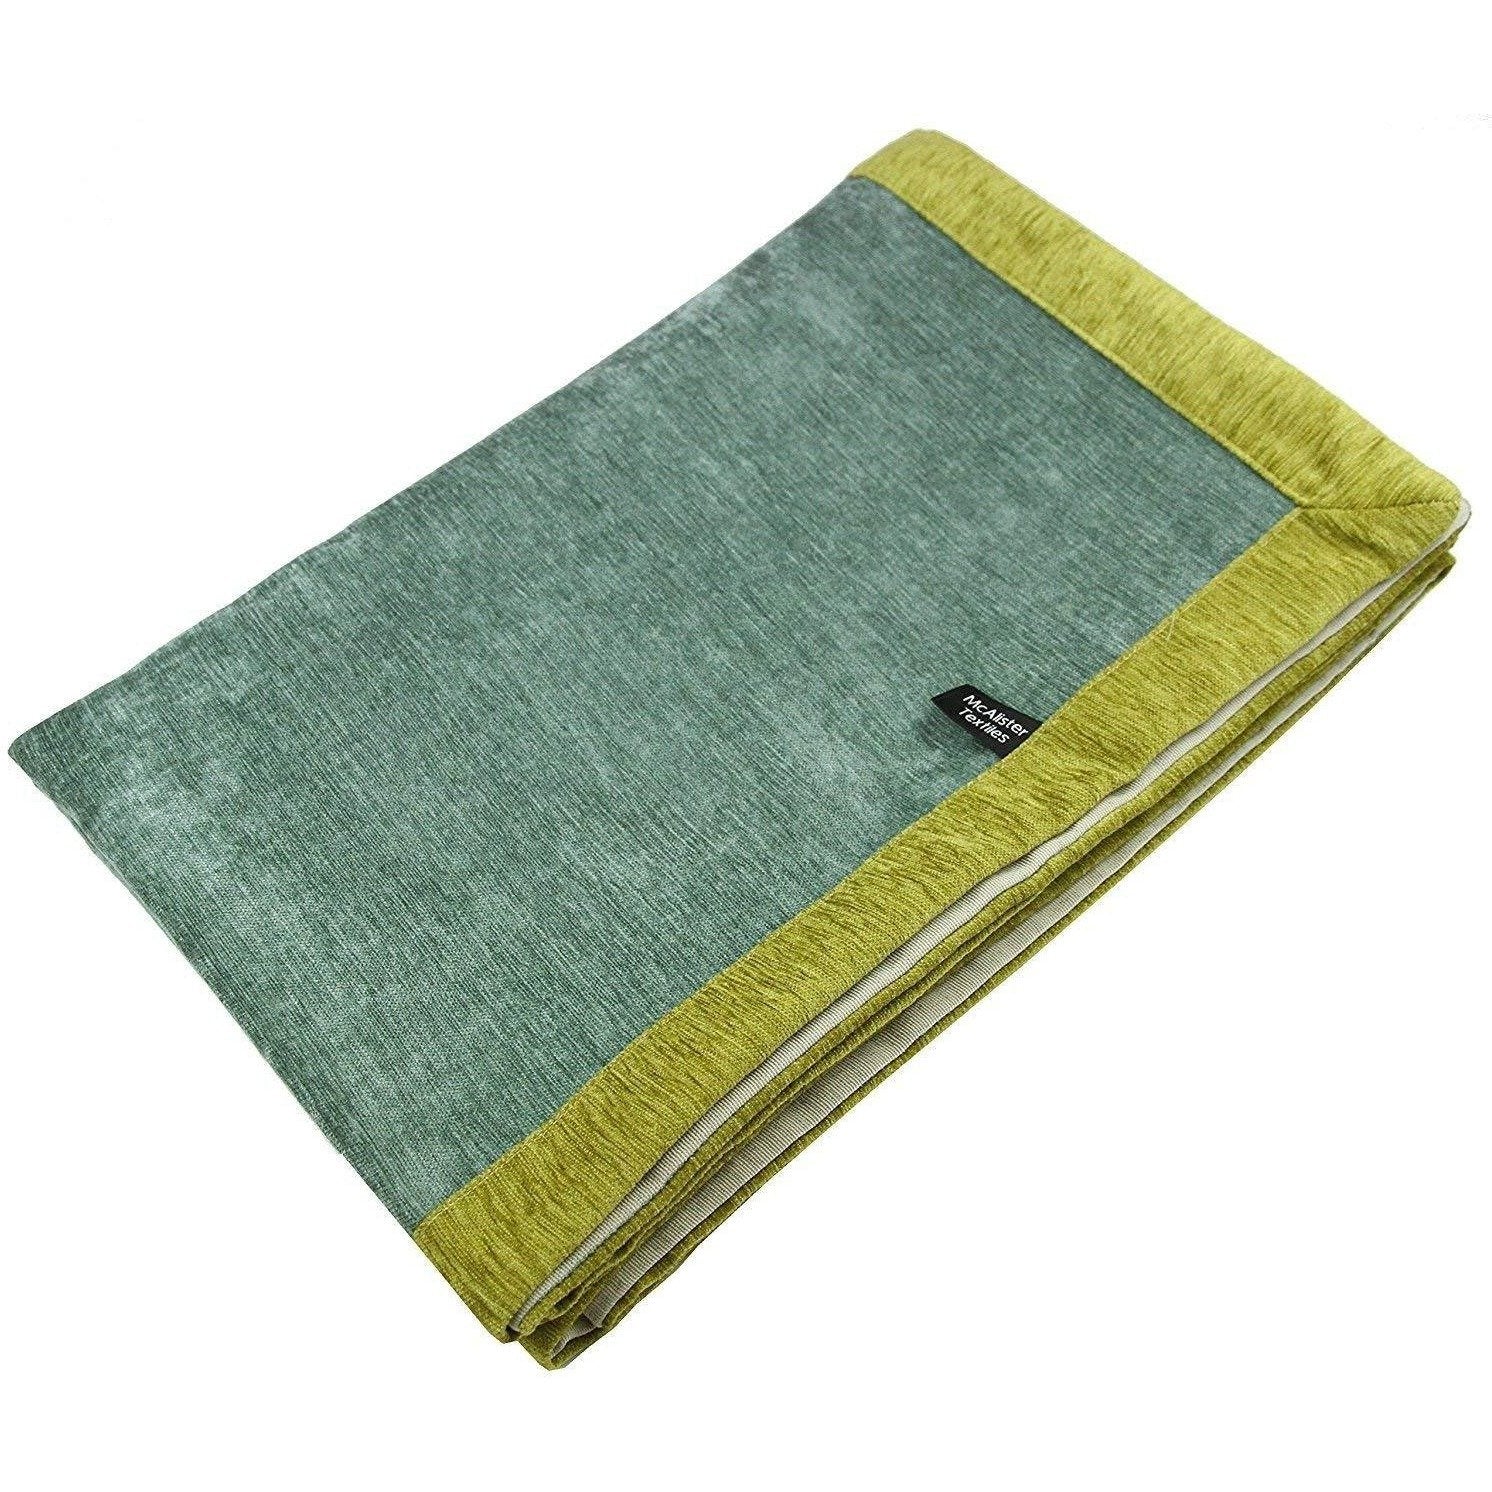 McAlister Textiles Alston Chenille Duck Egg Blue + Green Throws & Runners Throws and Runners Regular (130cm x 200cm) 